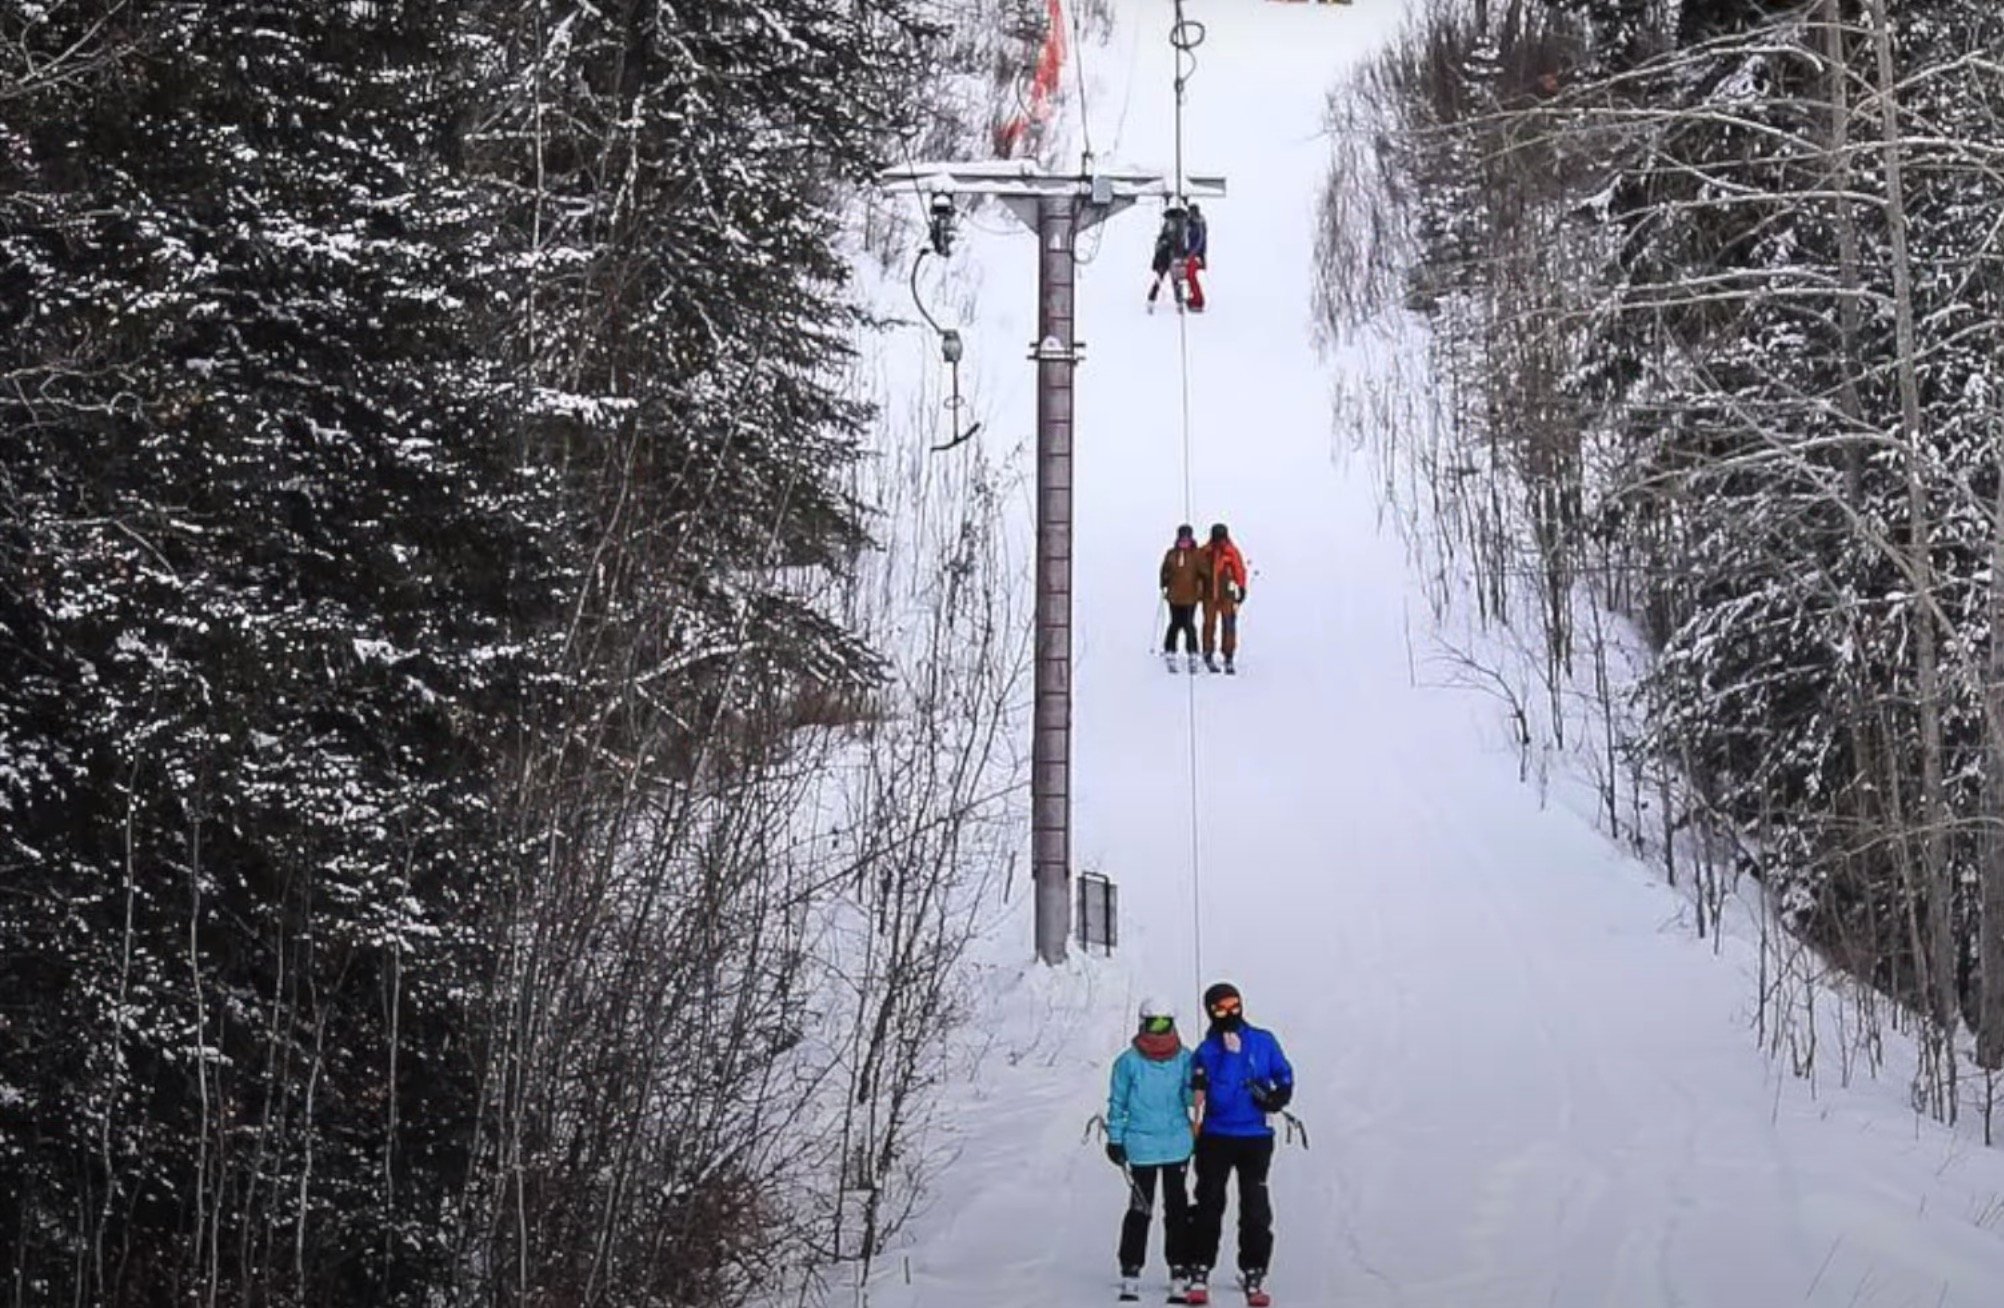 WATCH: 7 Underrated Alberta Ski Hills That You Should Check Out